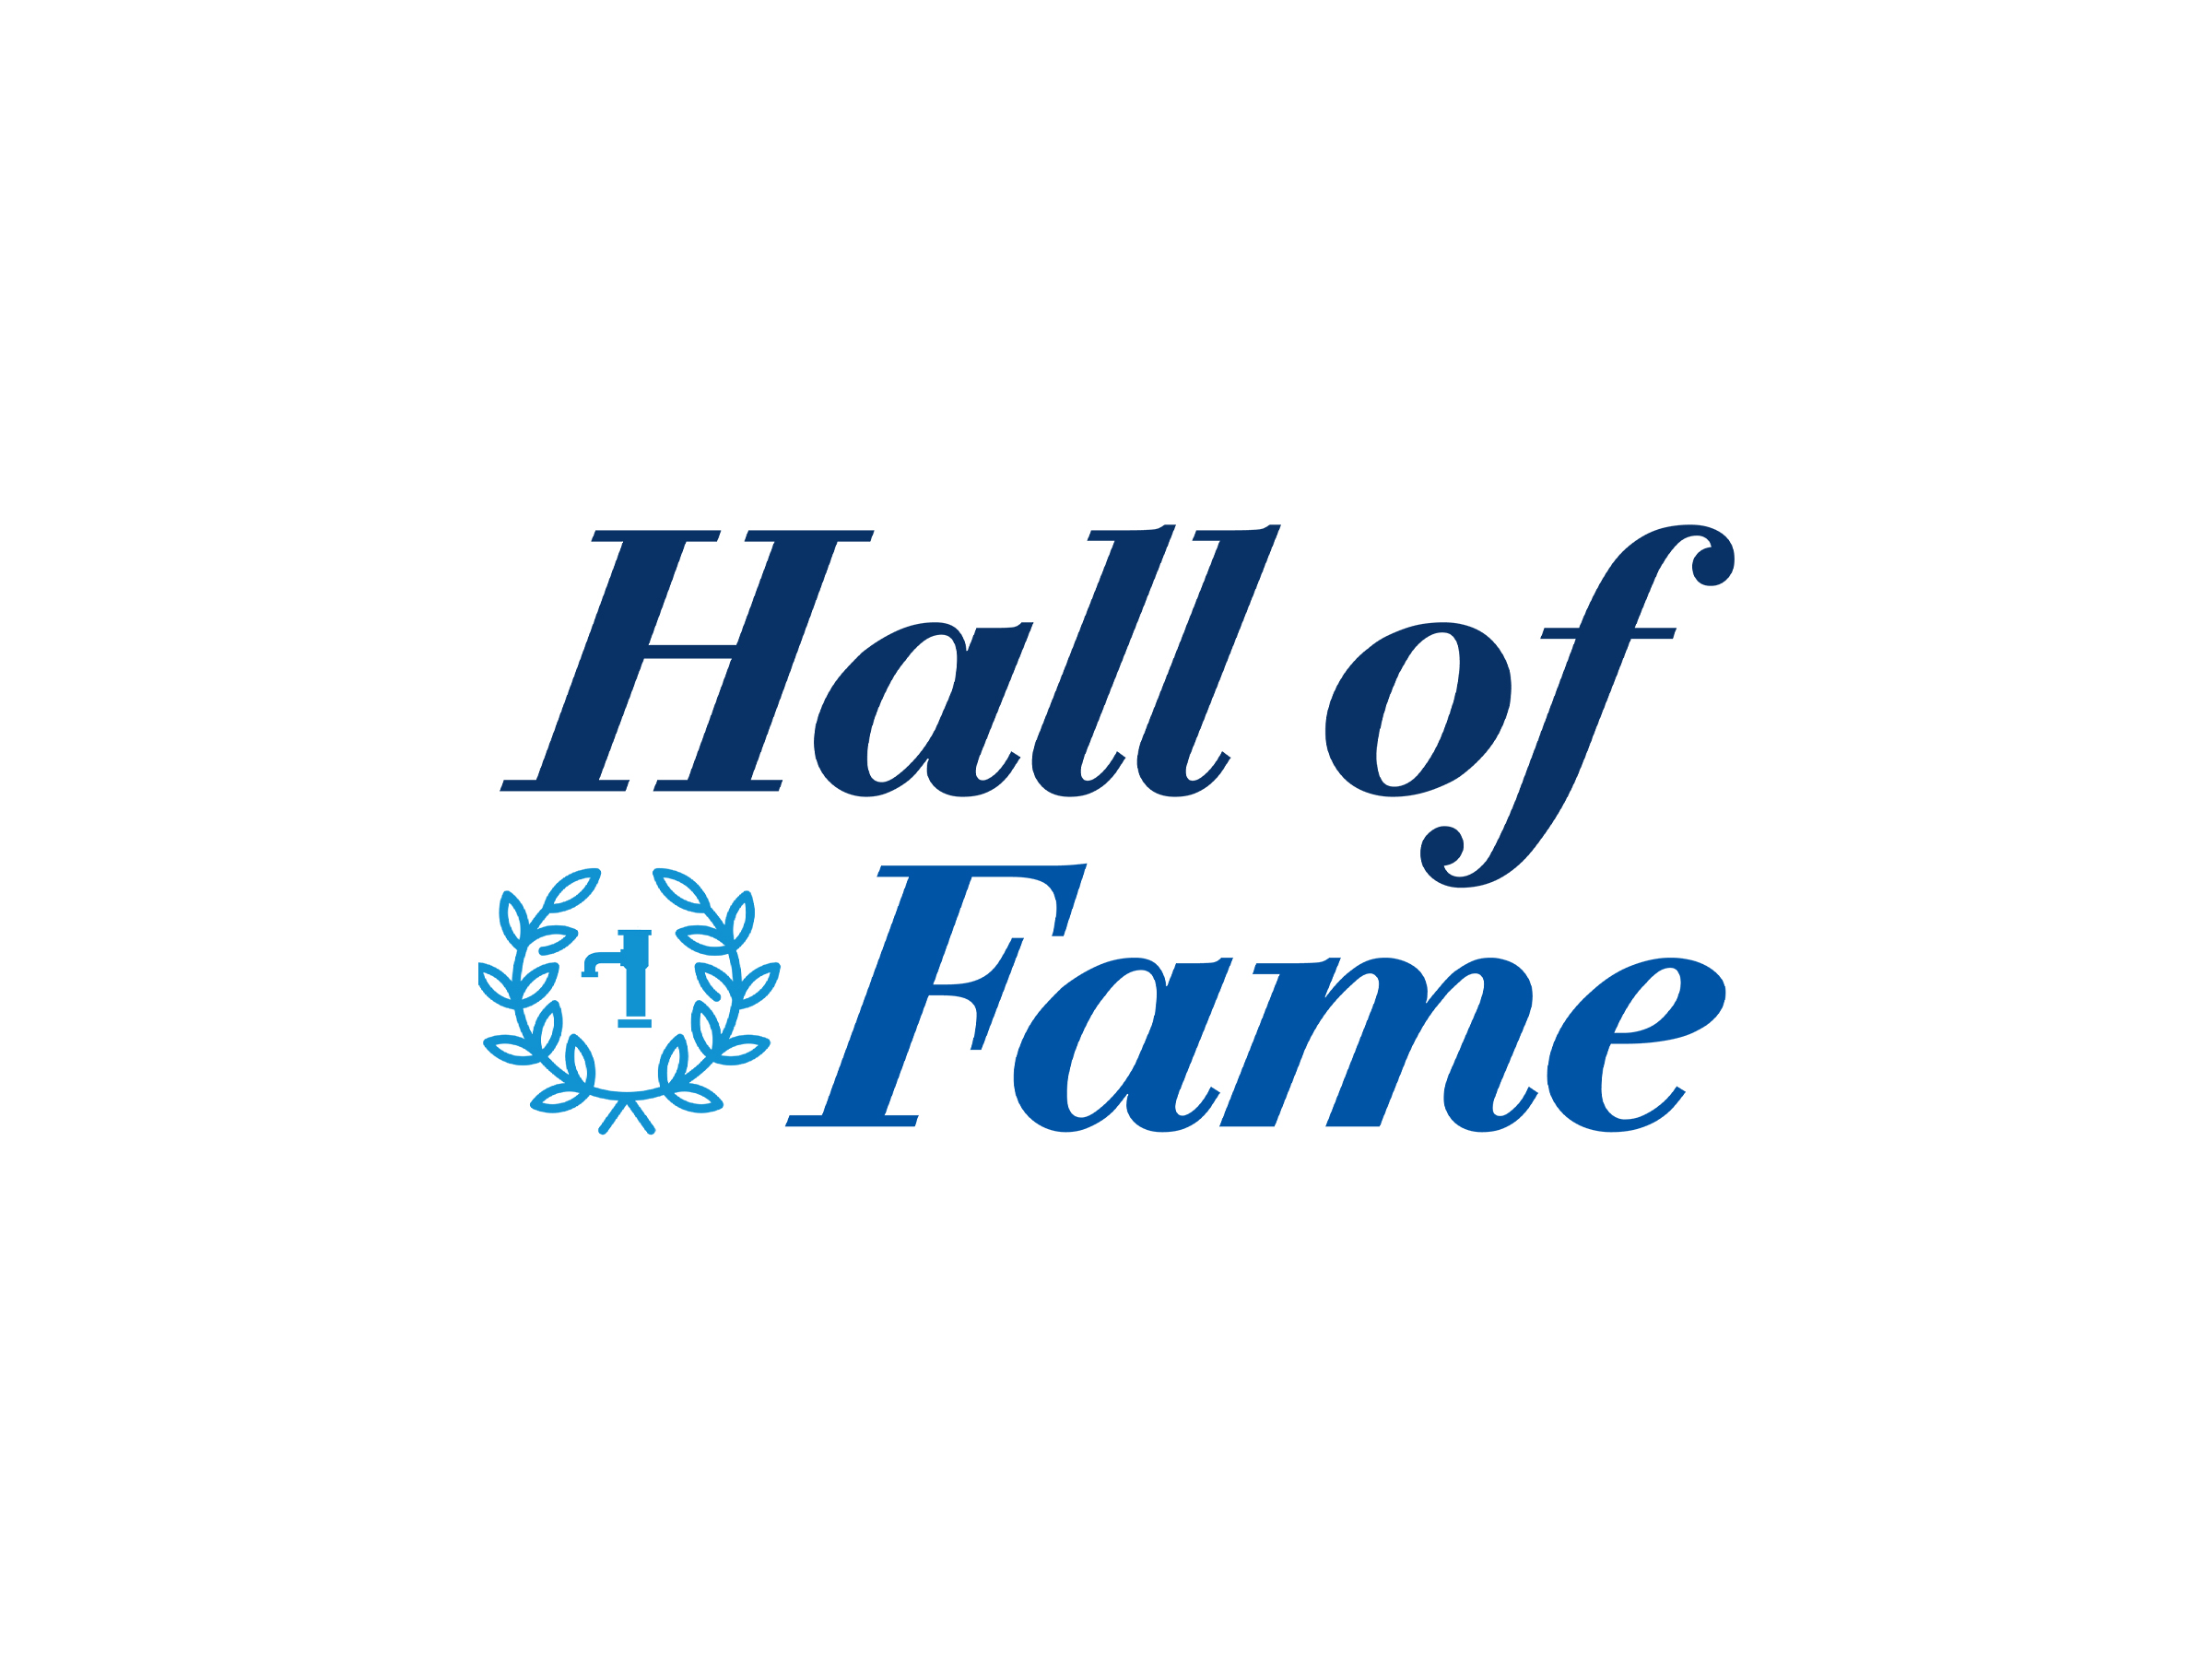 A logo for the College of Public Health's Hall of Fame event